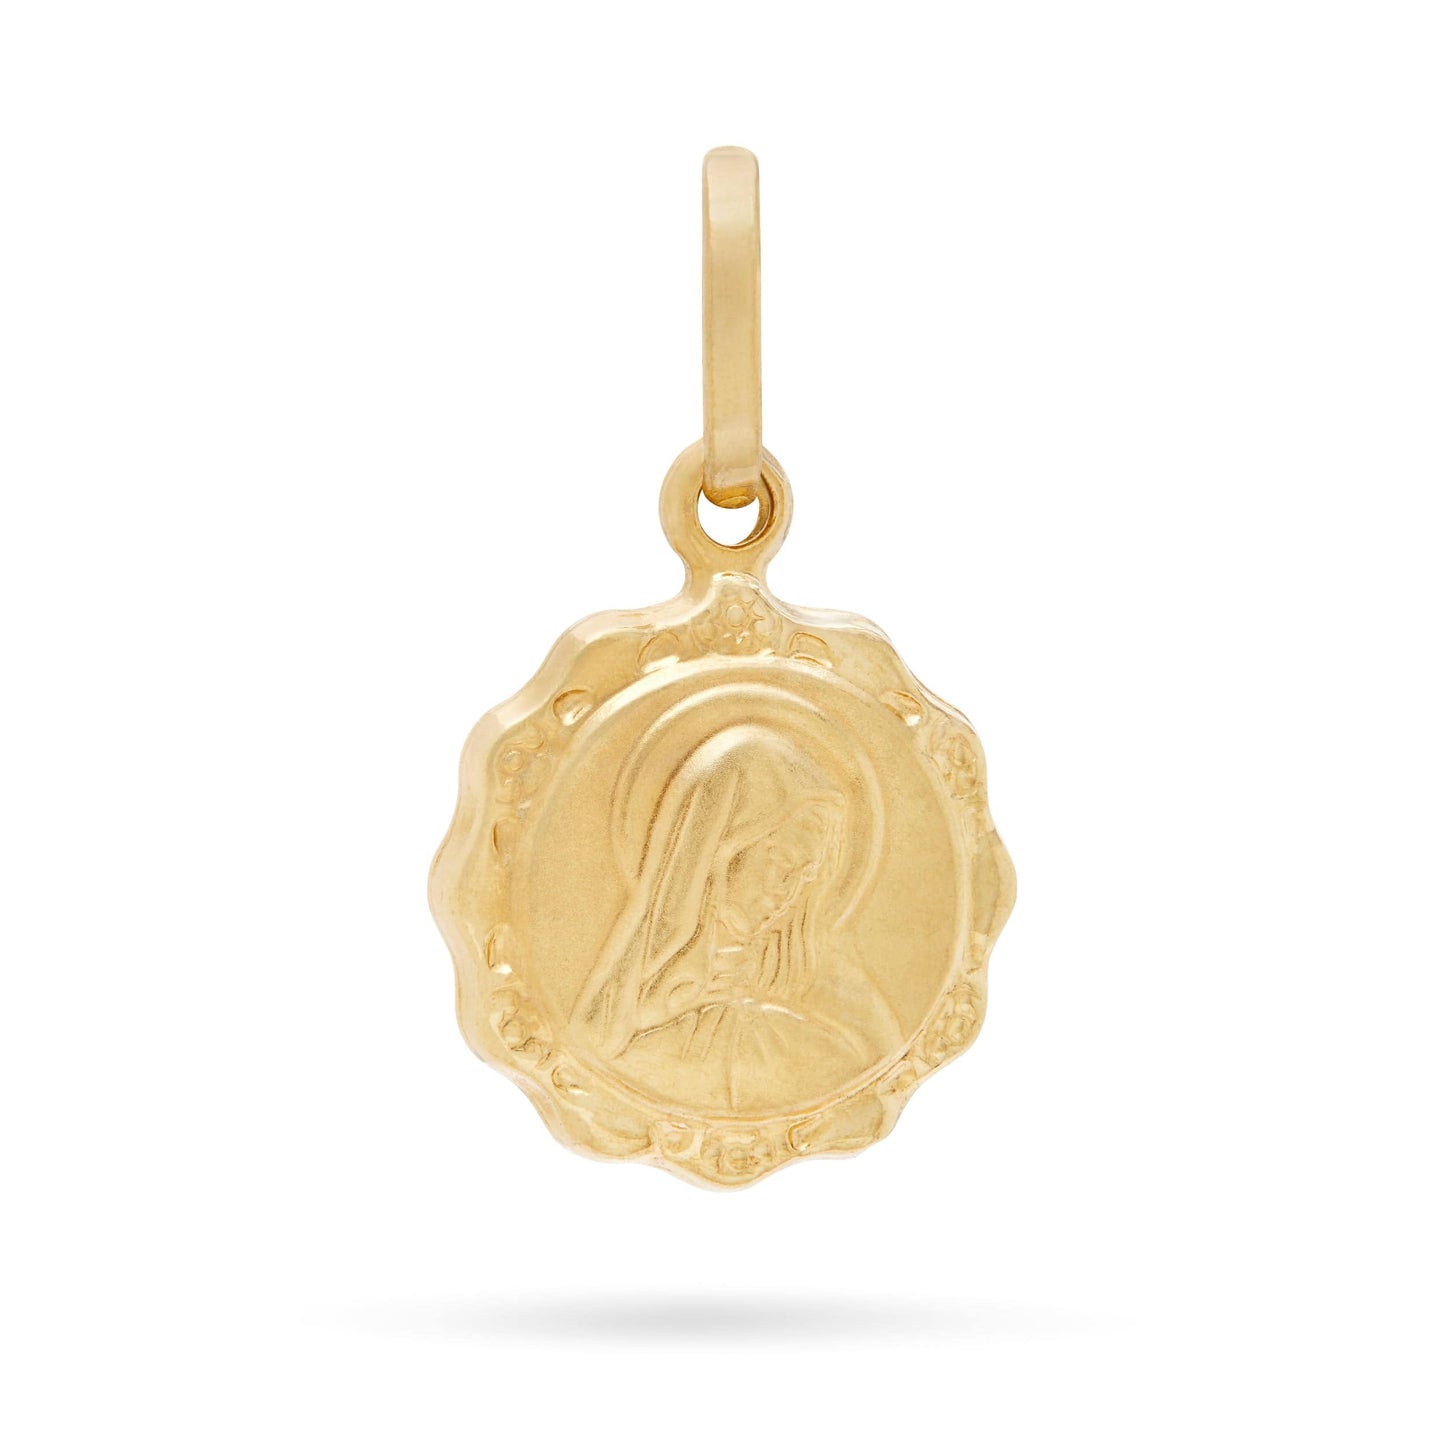 MONDO CATTOLICO Jewelry 11 mm (0.43 in) Our Lady of Sorrow Yellow Gold.